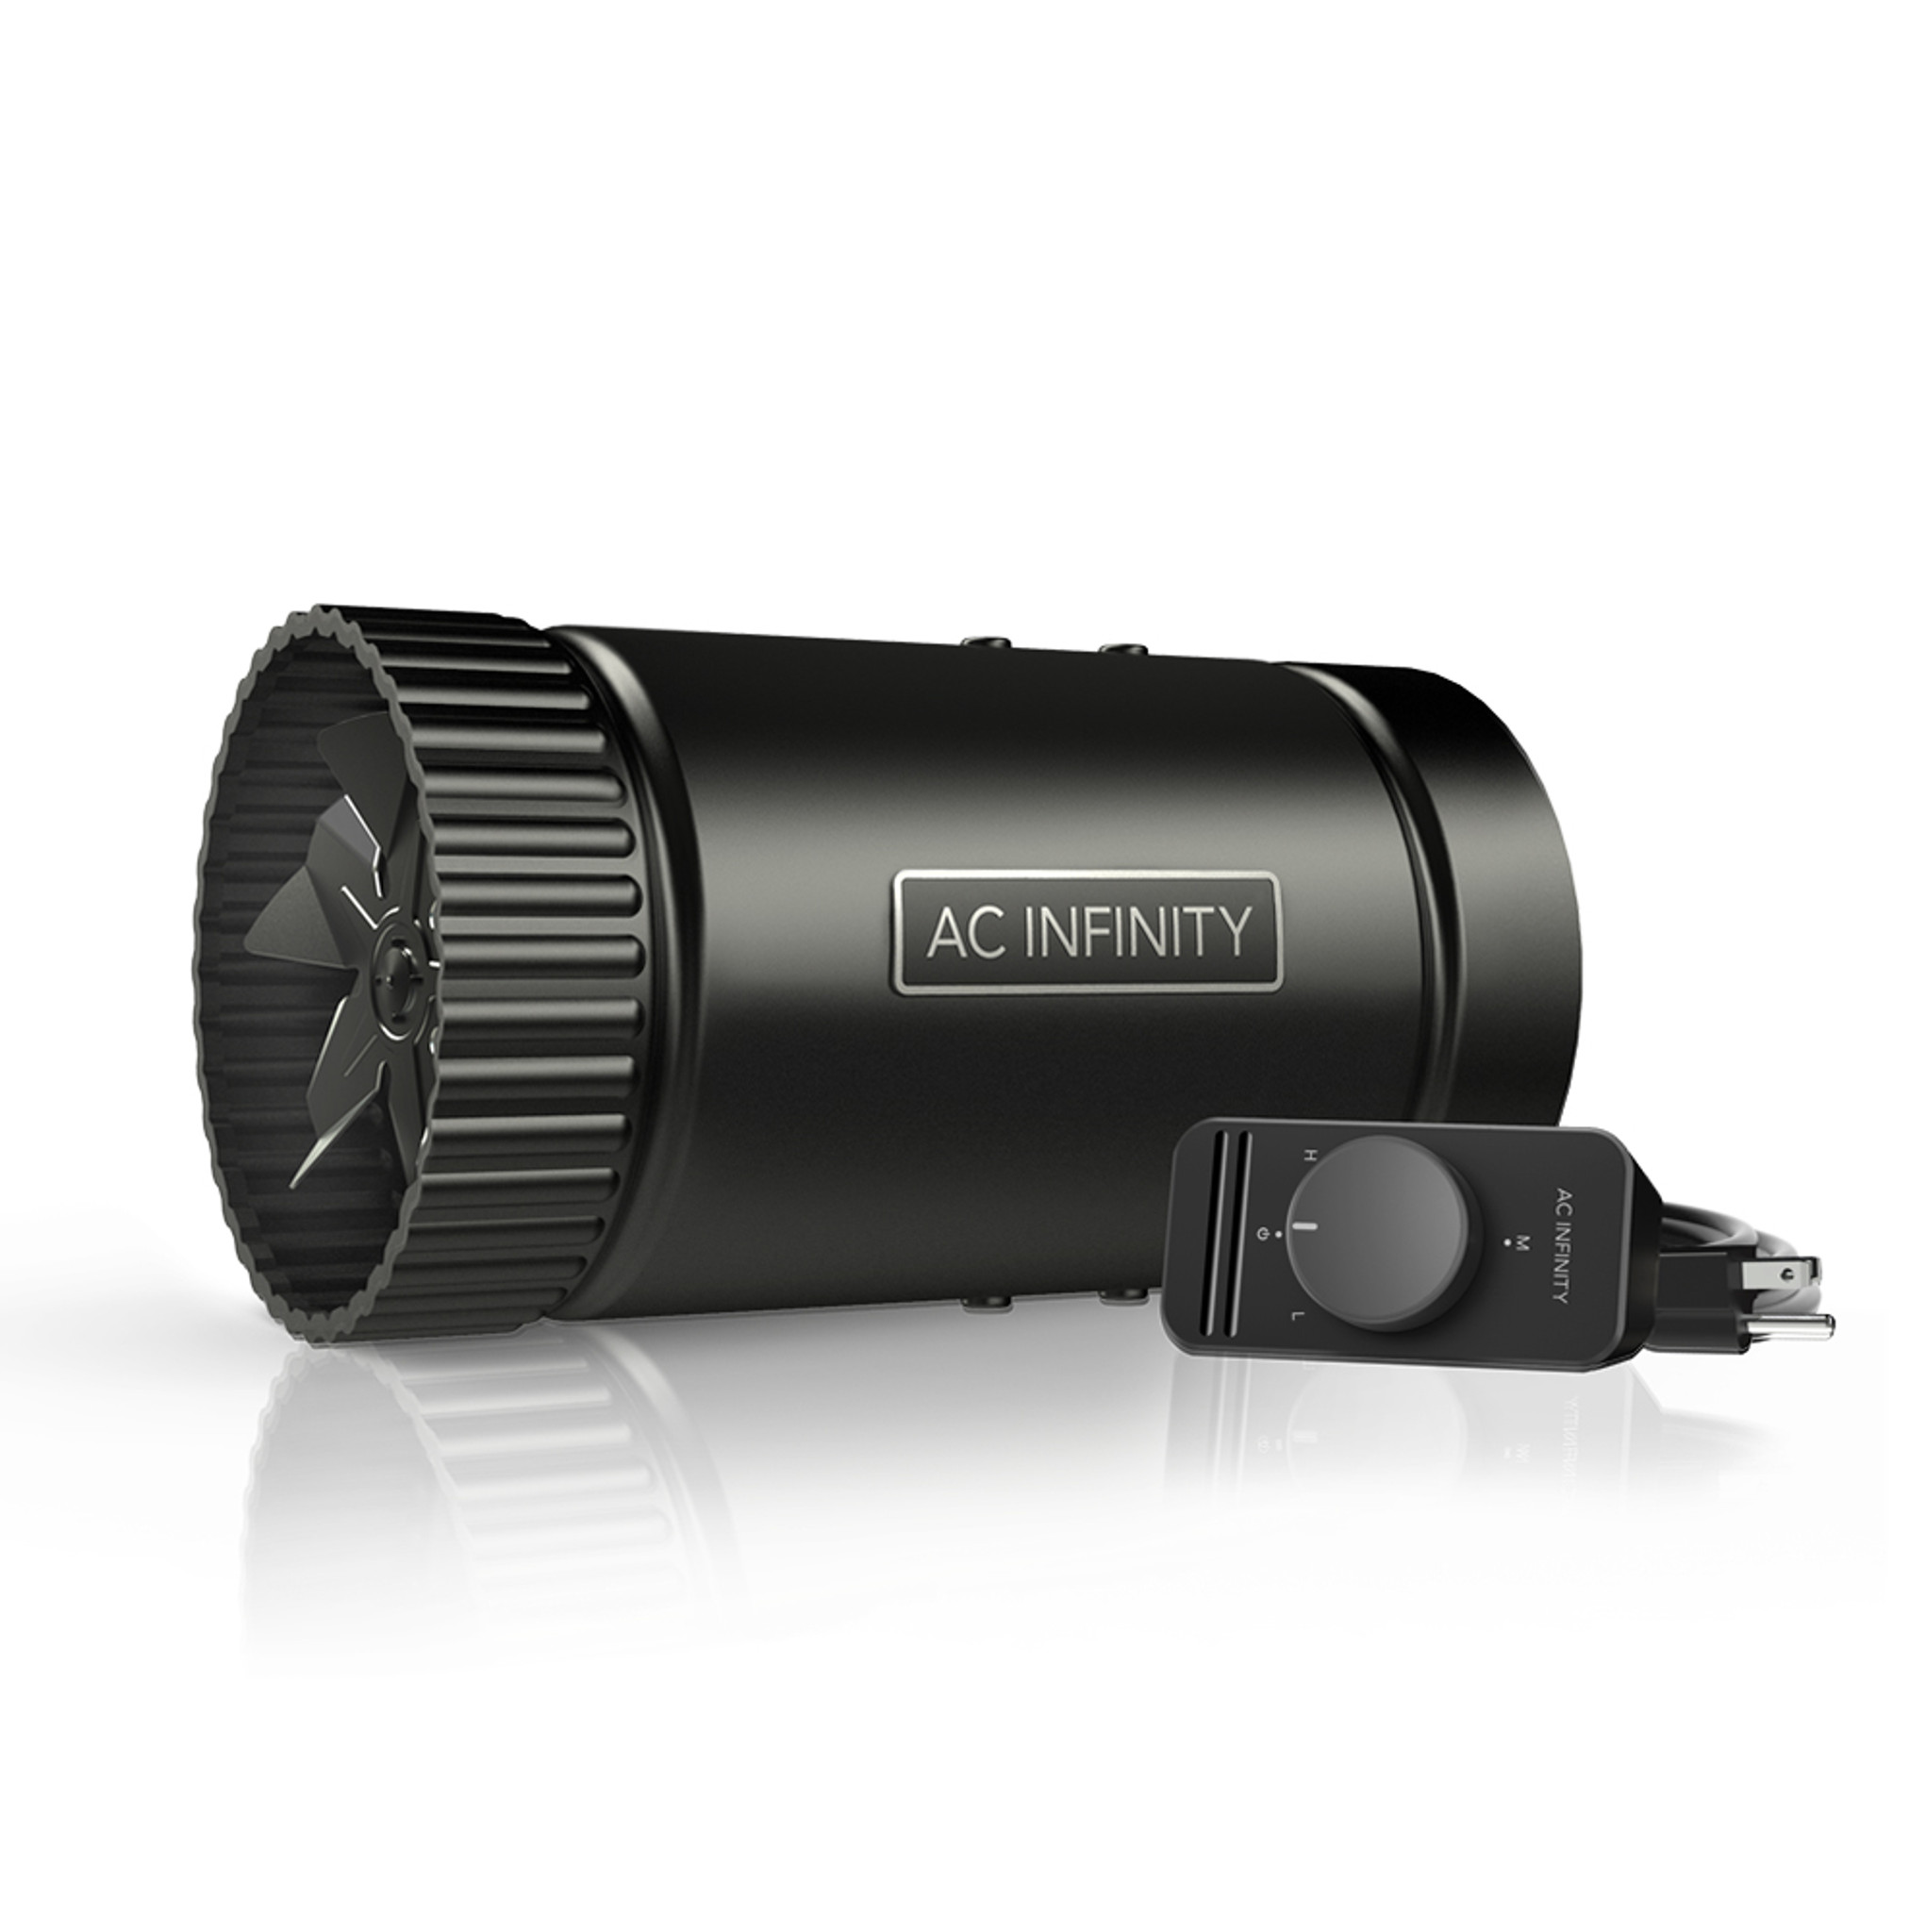 AC Infinity Cloudline S4  The Inline Fan for your Grow 